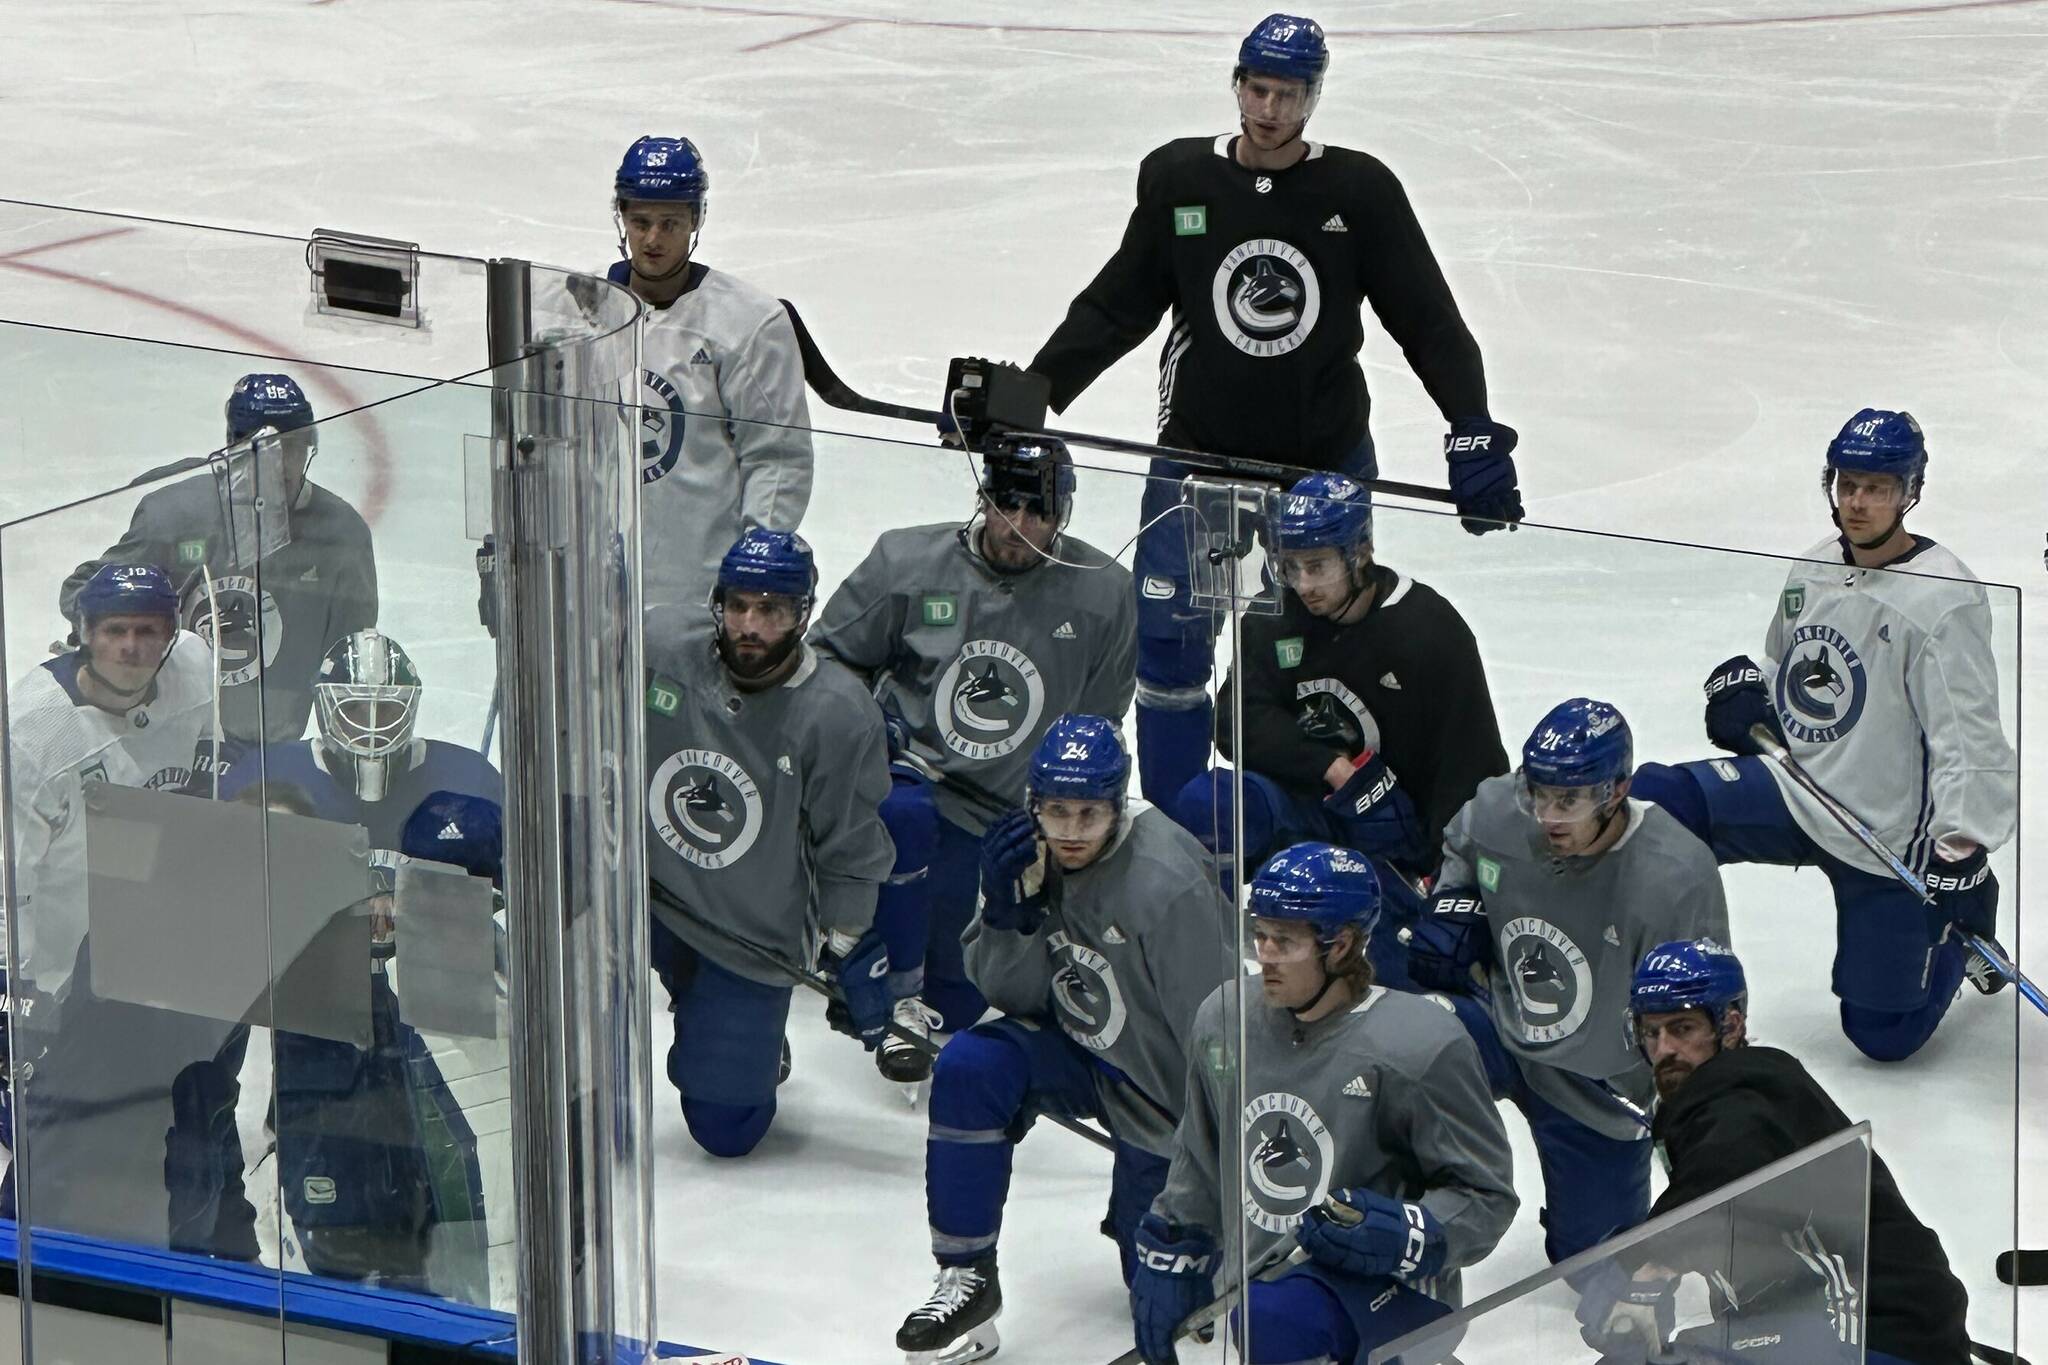 A rare sight - Canucks coaches using the dry board to explain a drill during practice. Black Press Media photo